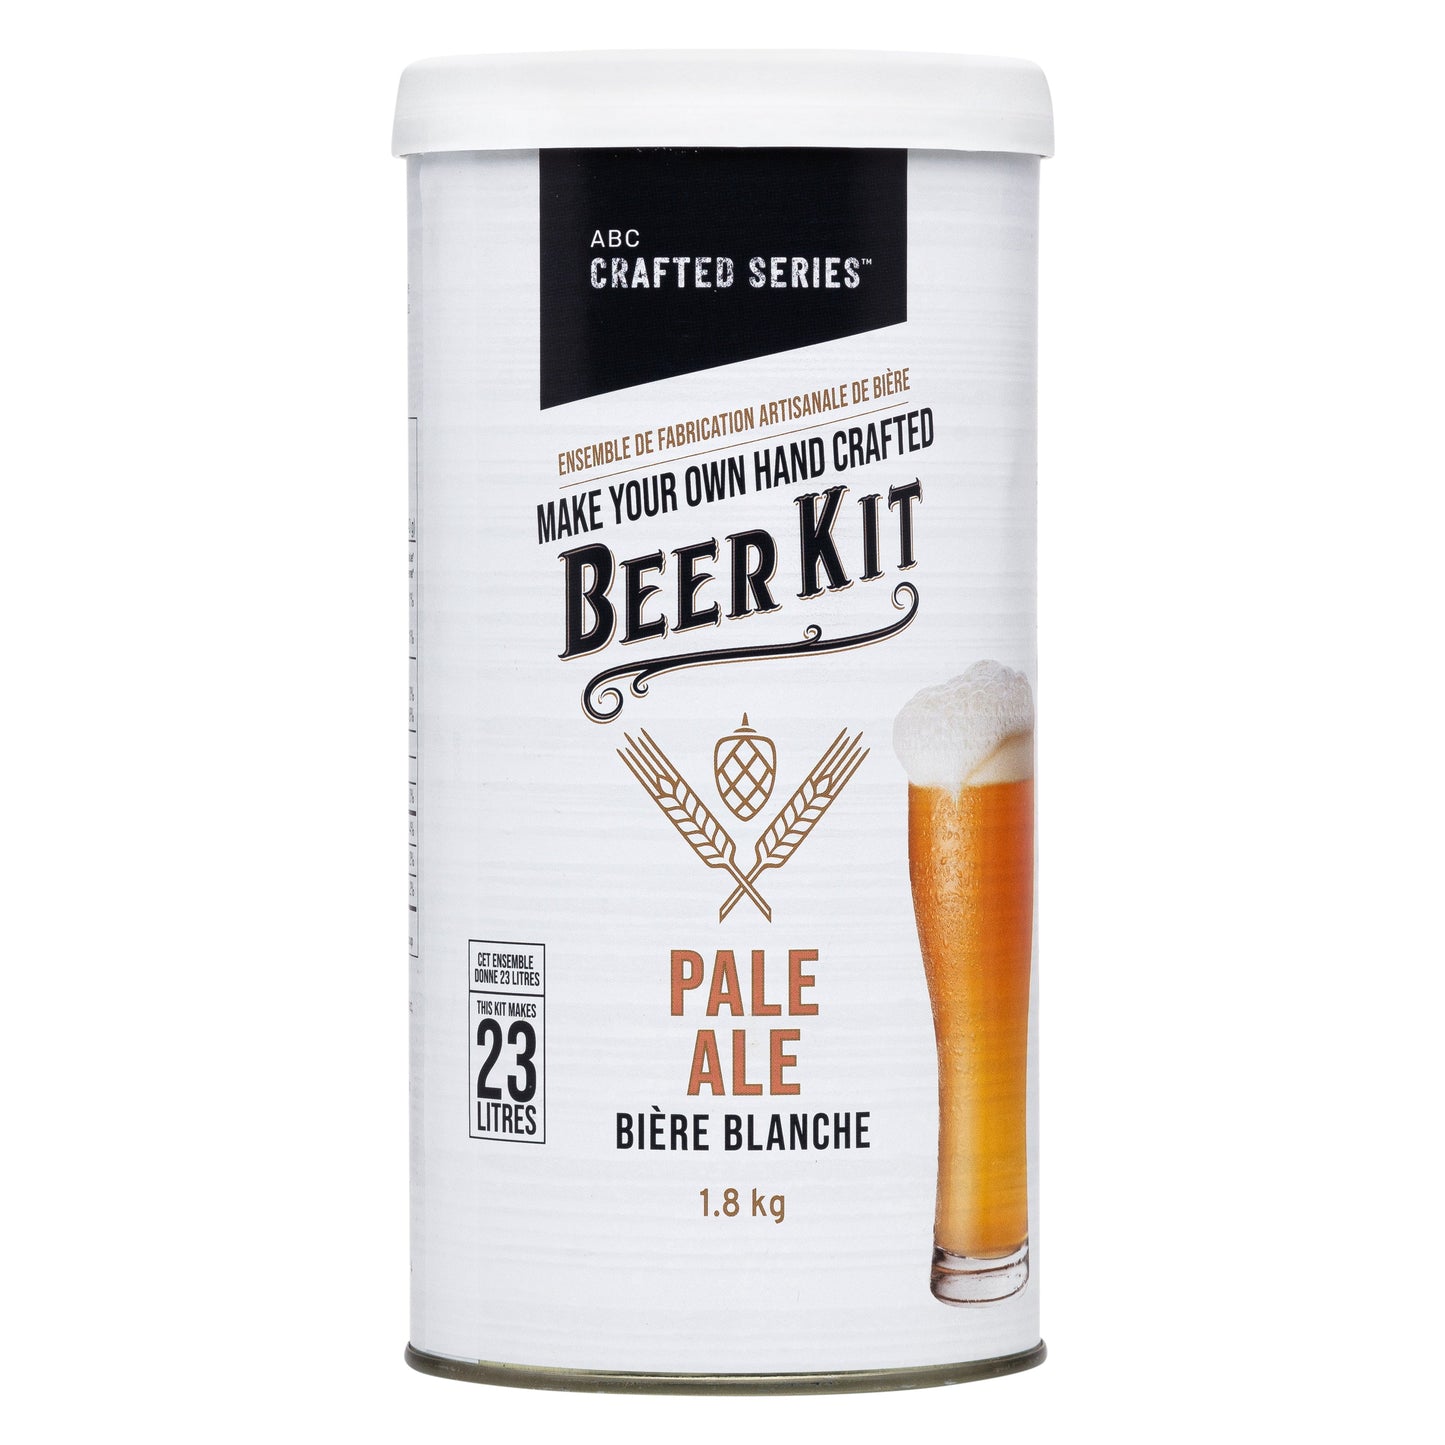 ABC Crafted Series Pale Ale